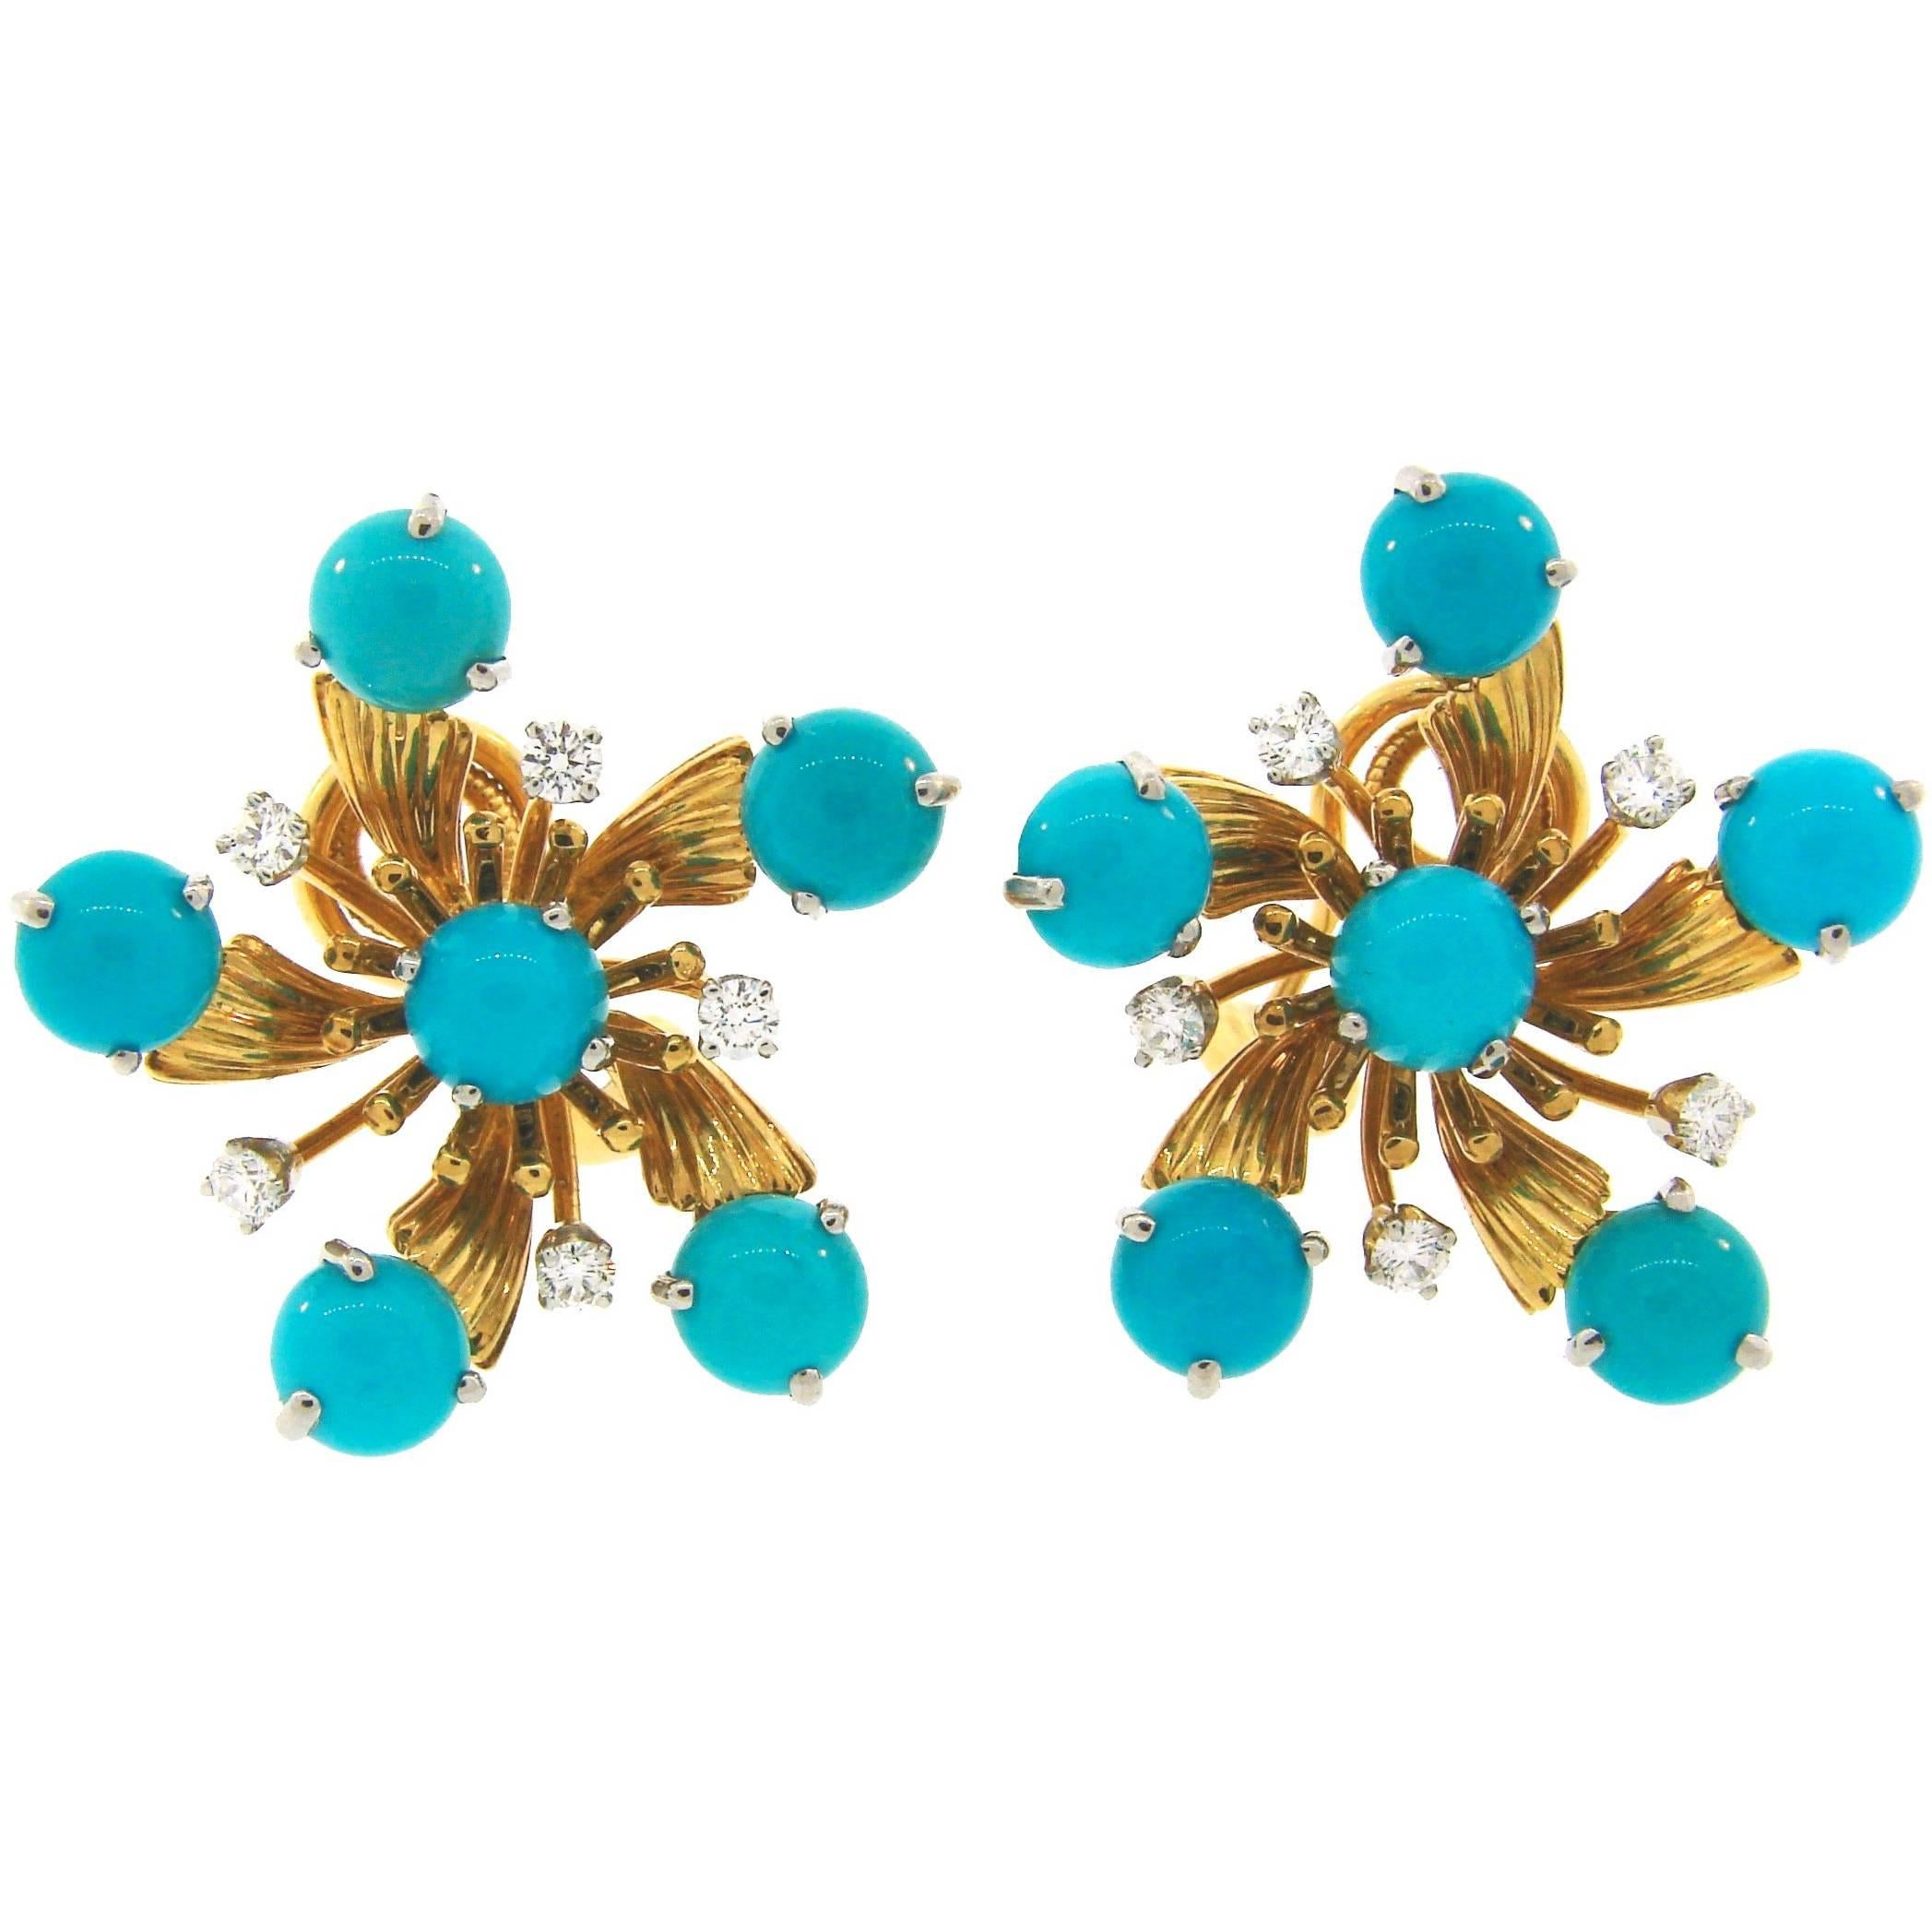 Tiffany & Co. by Schlumberger Turquoise Diamond Yellow Gold Earrings